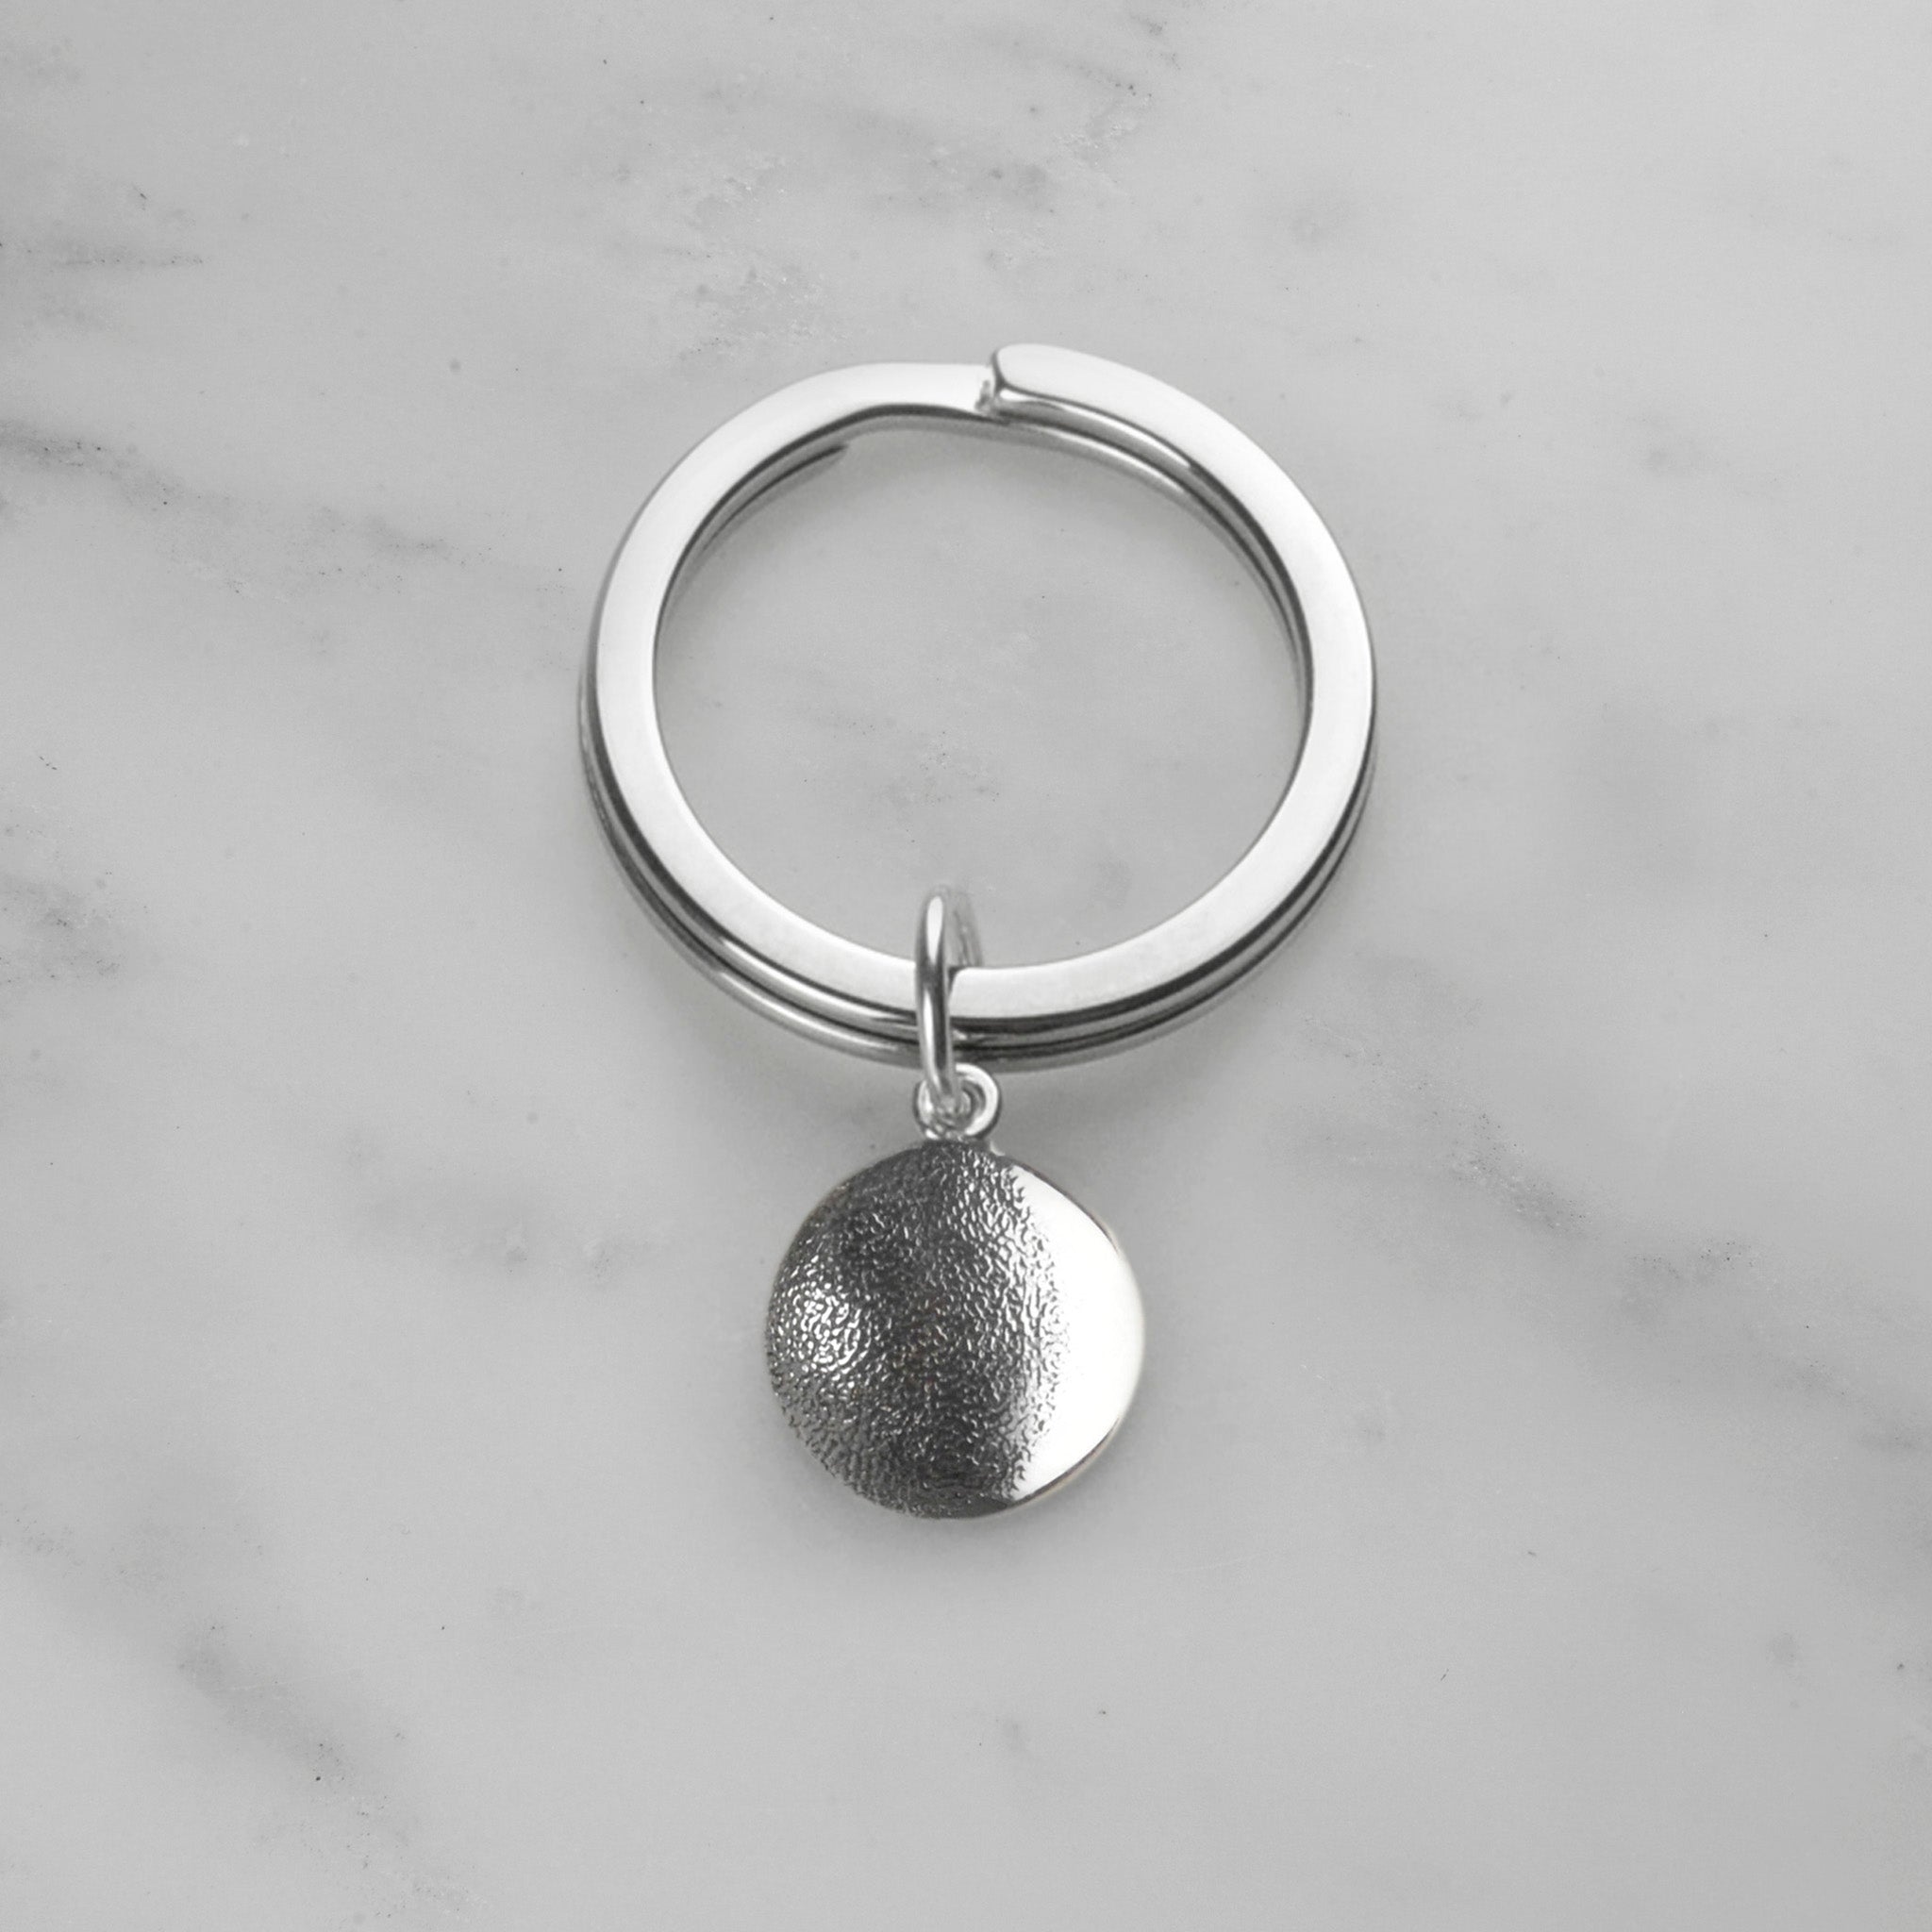 Your Moon Keyring (Waxing Crescent)